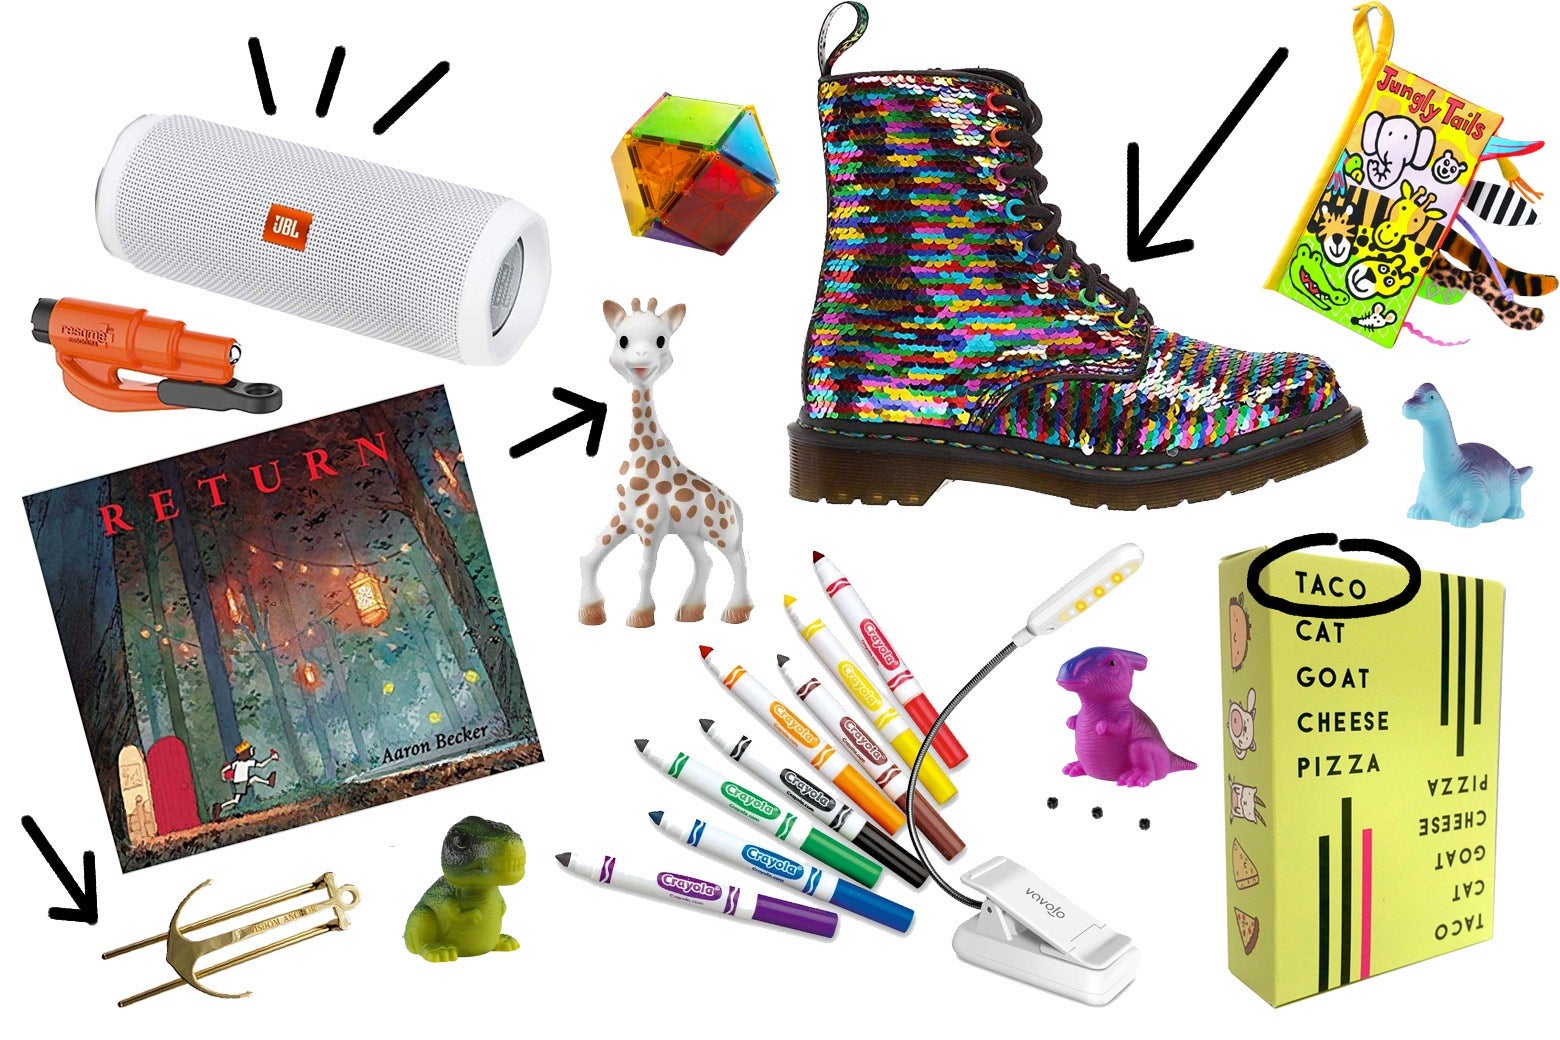 Collage of kids' gifts, including Bluetooth speaker, toy giraffe, markers, Doc Martens, and Taco Cat Goat Pizza